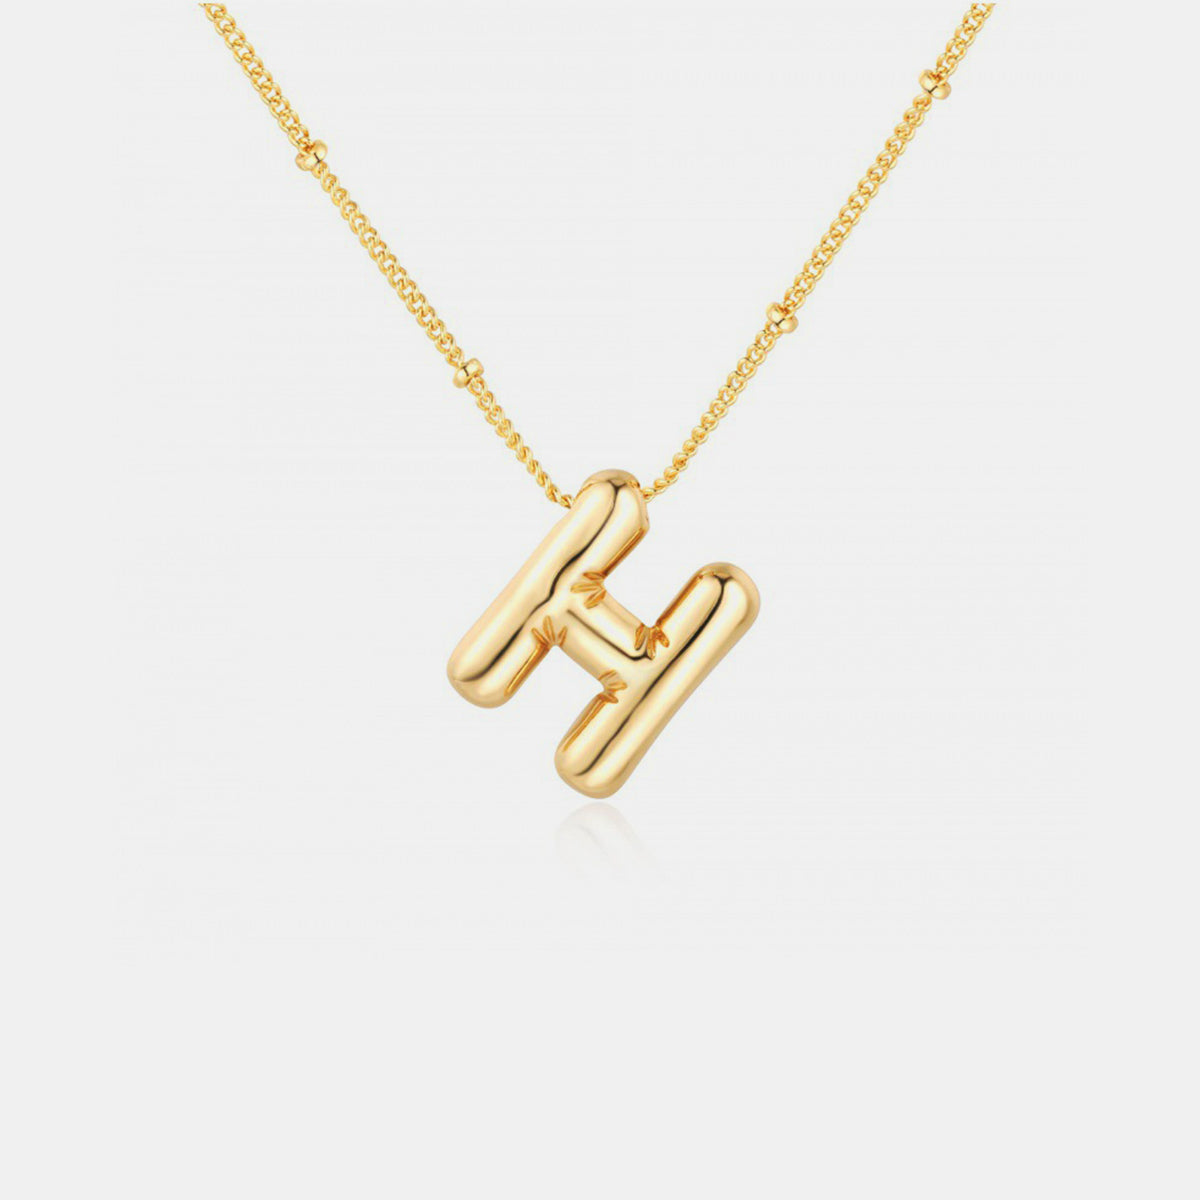 TEEK - A-J Gold-Plated Letter Necklace JEWELRY TEEK Trend Style H  